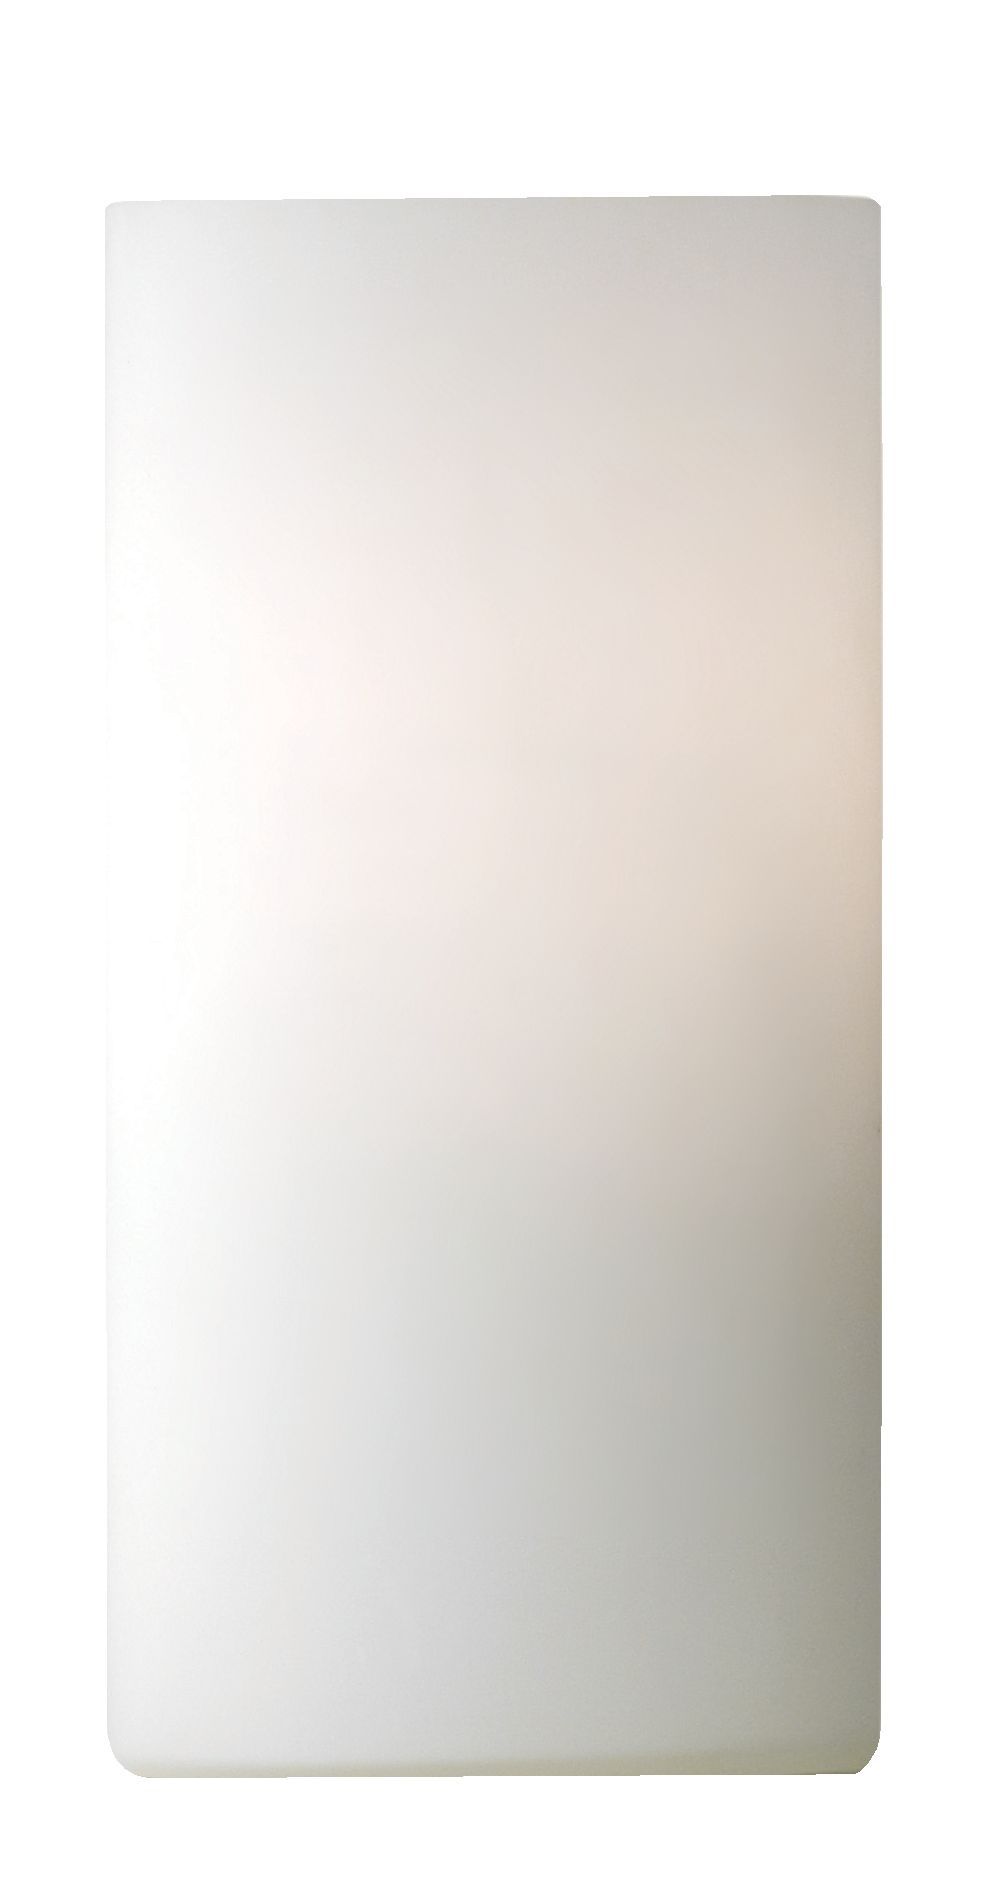 Los White Incandescent Table lamp